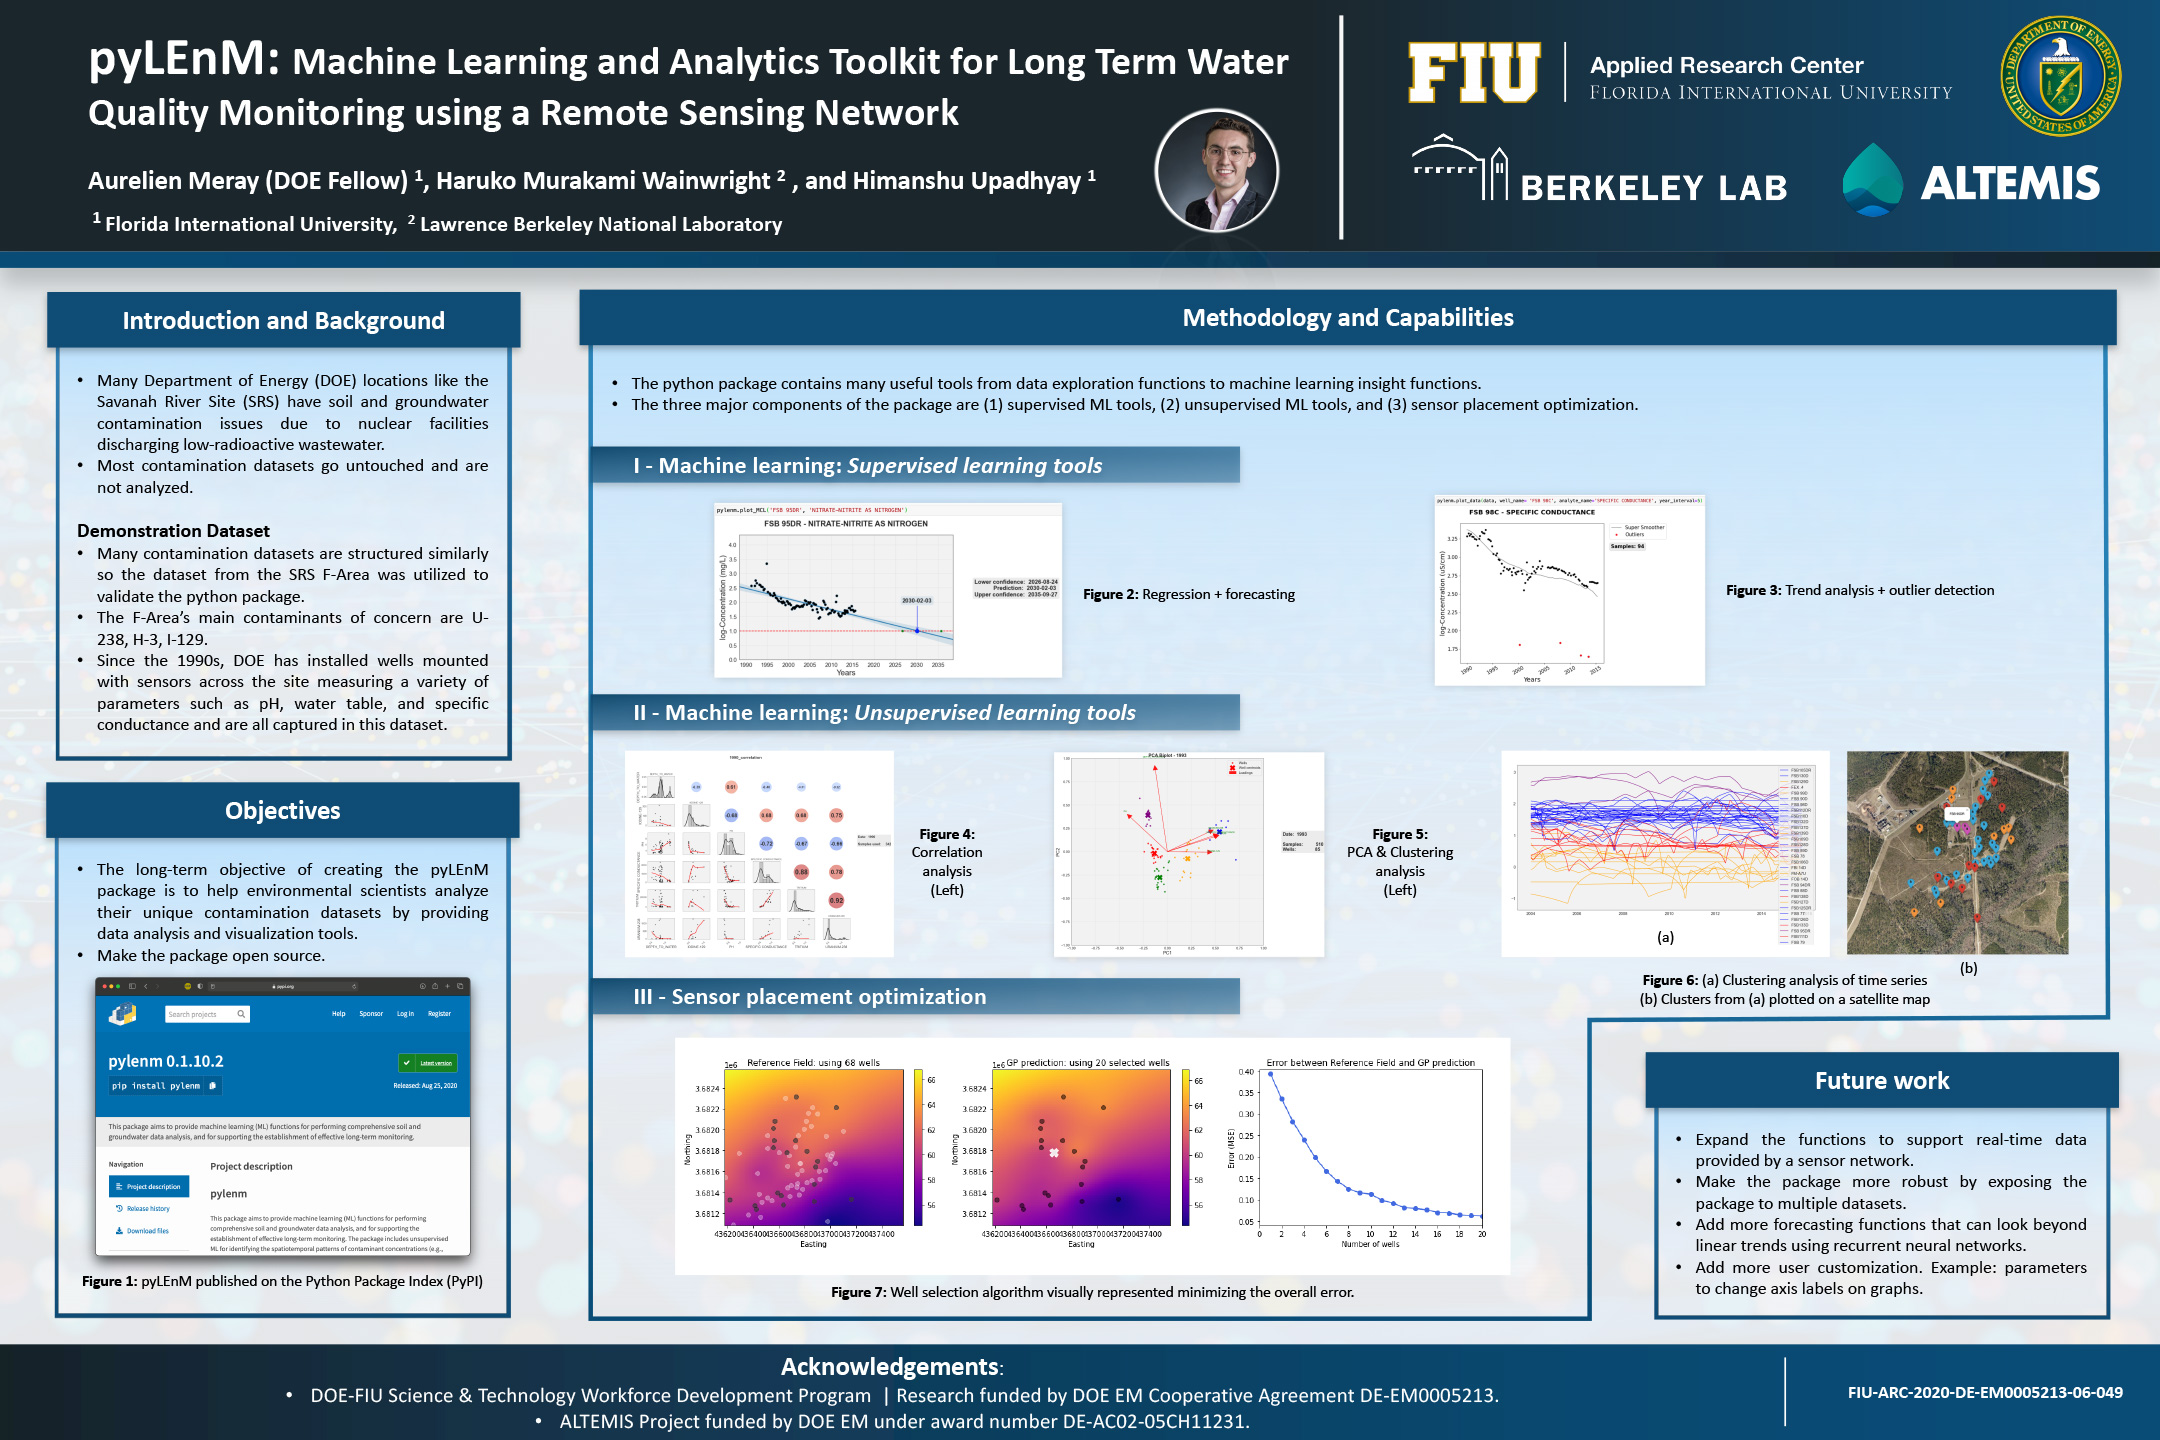 Research poster covering pyLEnM: Machine Learning and Analytics Toolkit for Long Term Water Quality Monitoring using a Remote Sensing Network